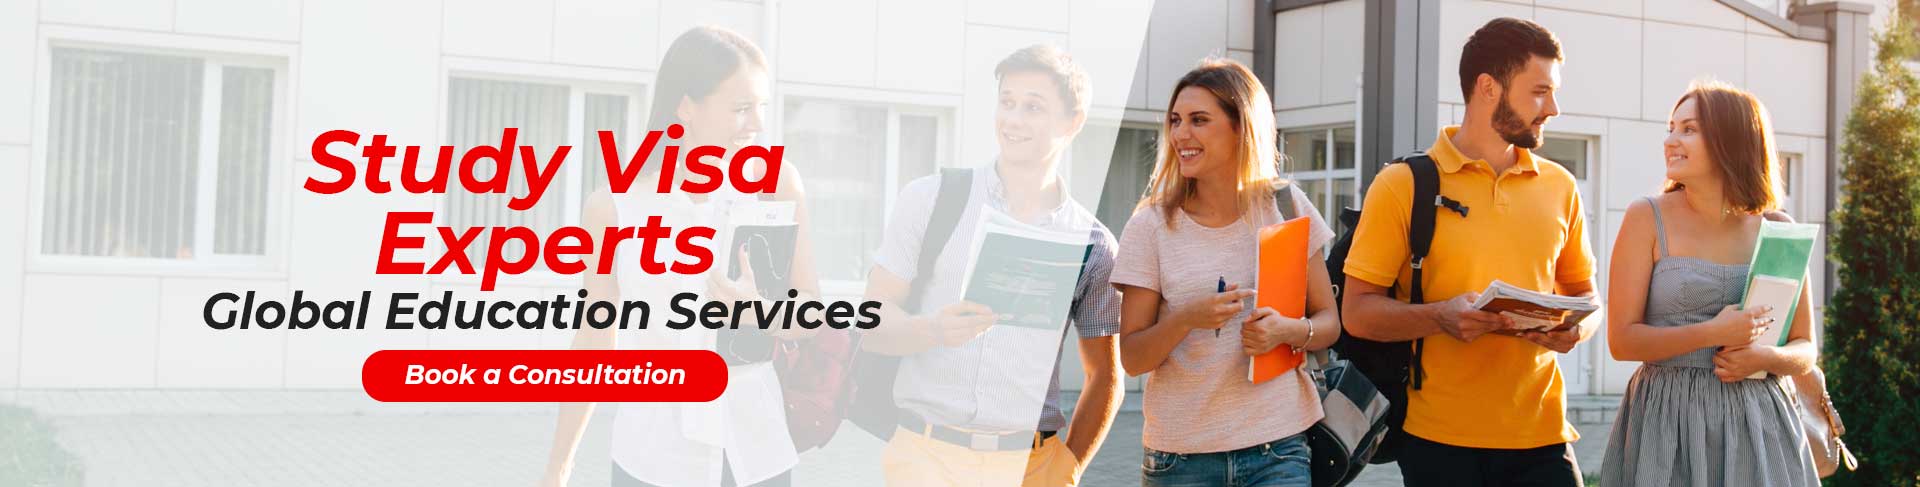 study visa experts global education services